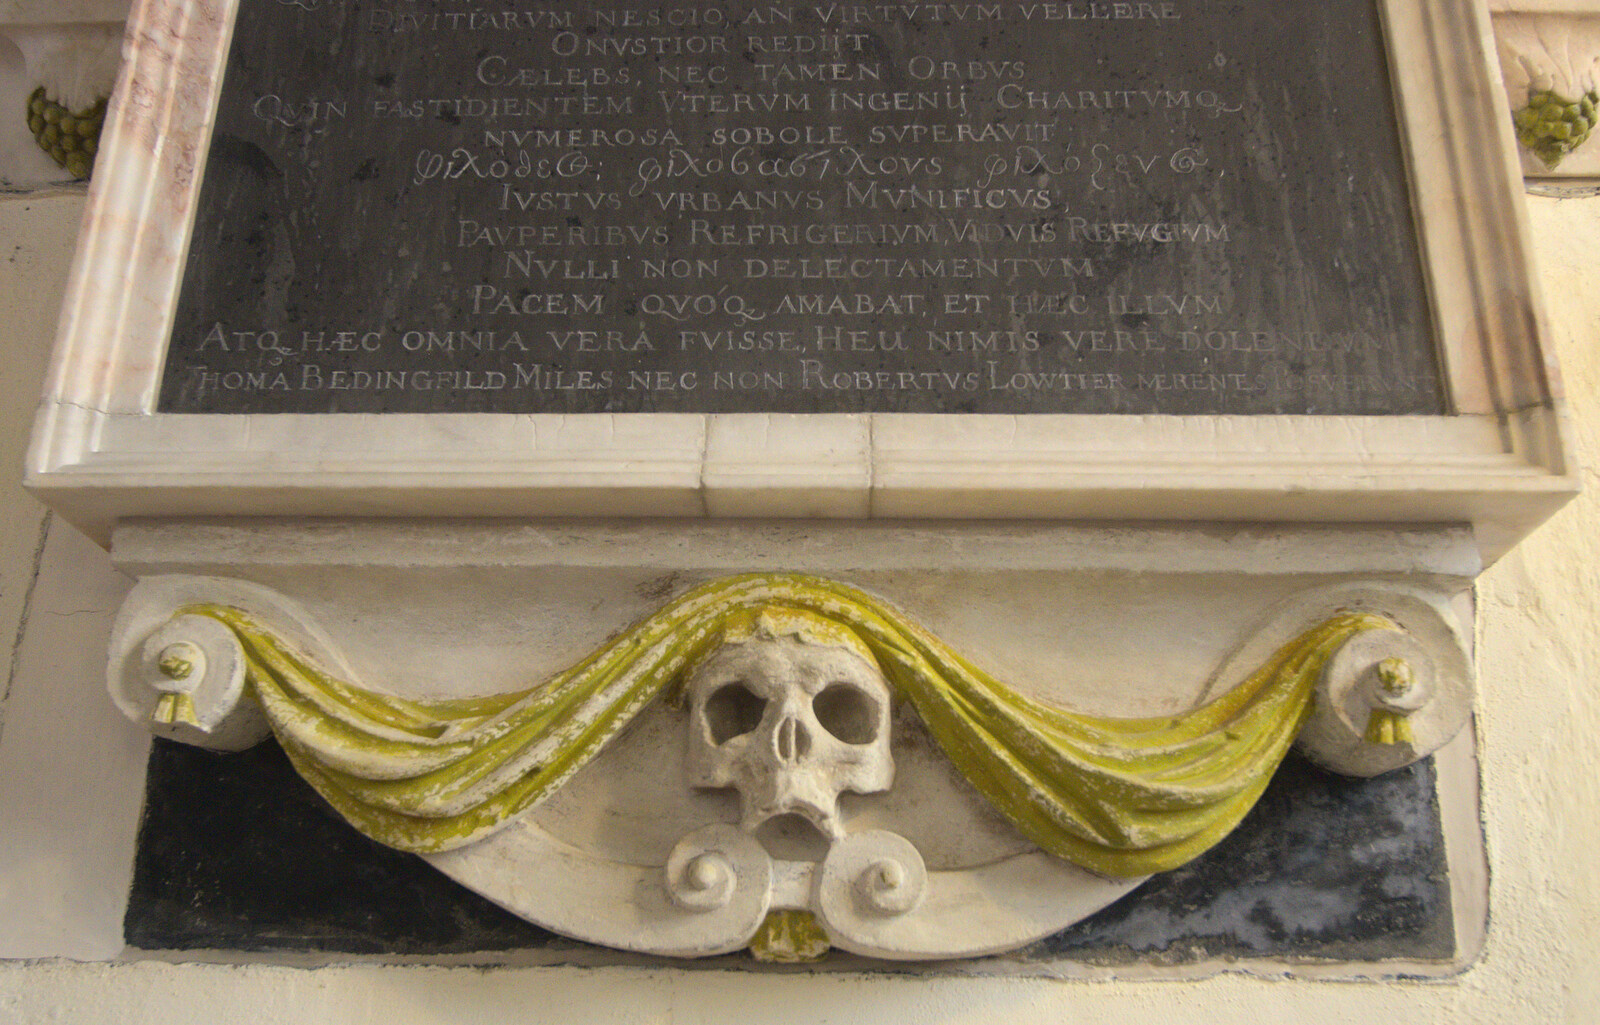 Death's head scroll from The Oaksmere, and the Gislingham Flower Festival, Suffolk - 24th August 2014